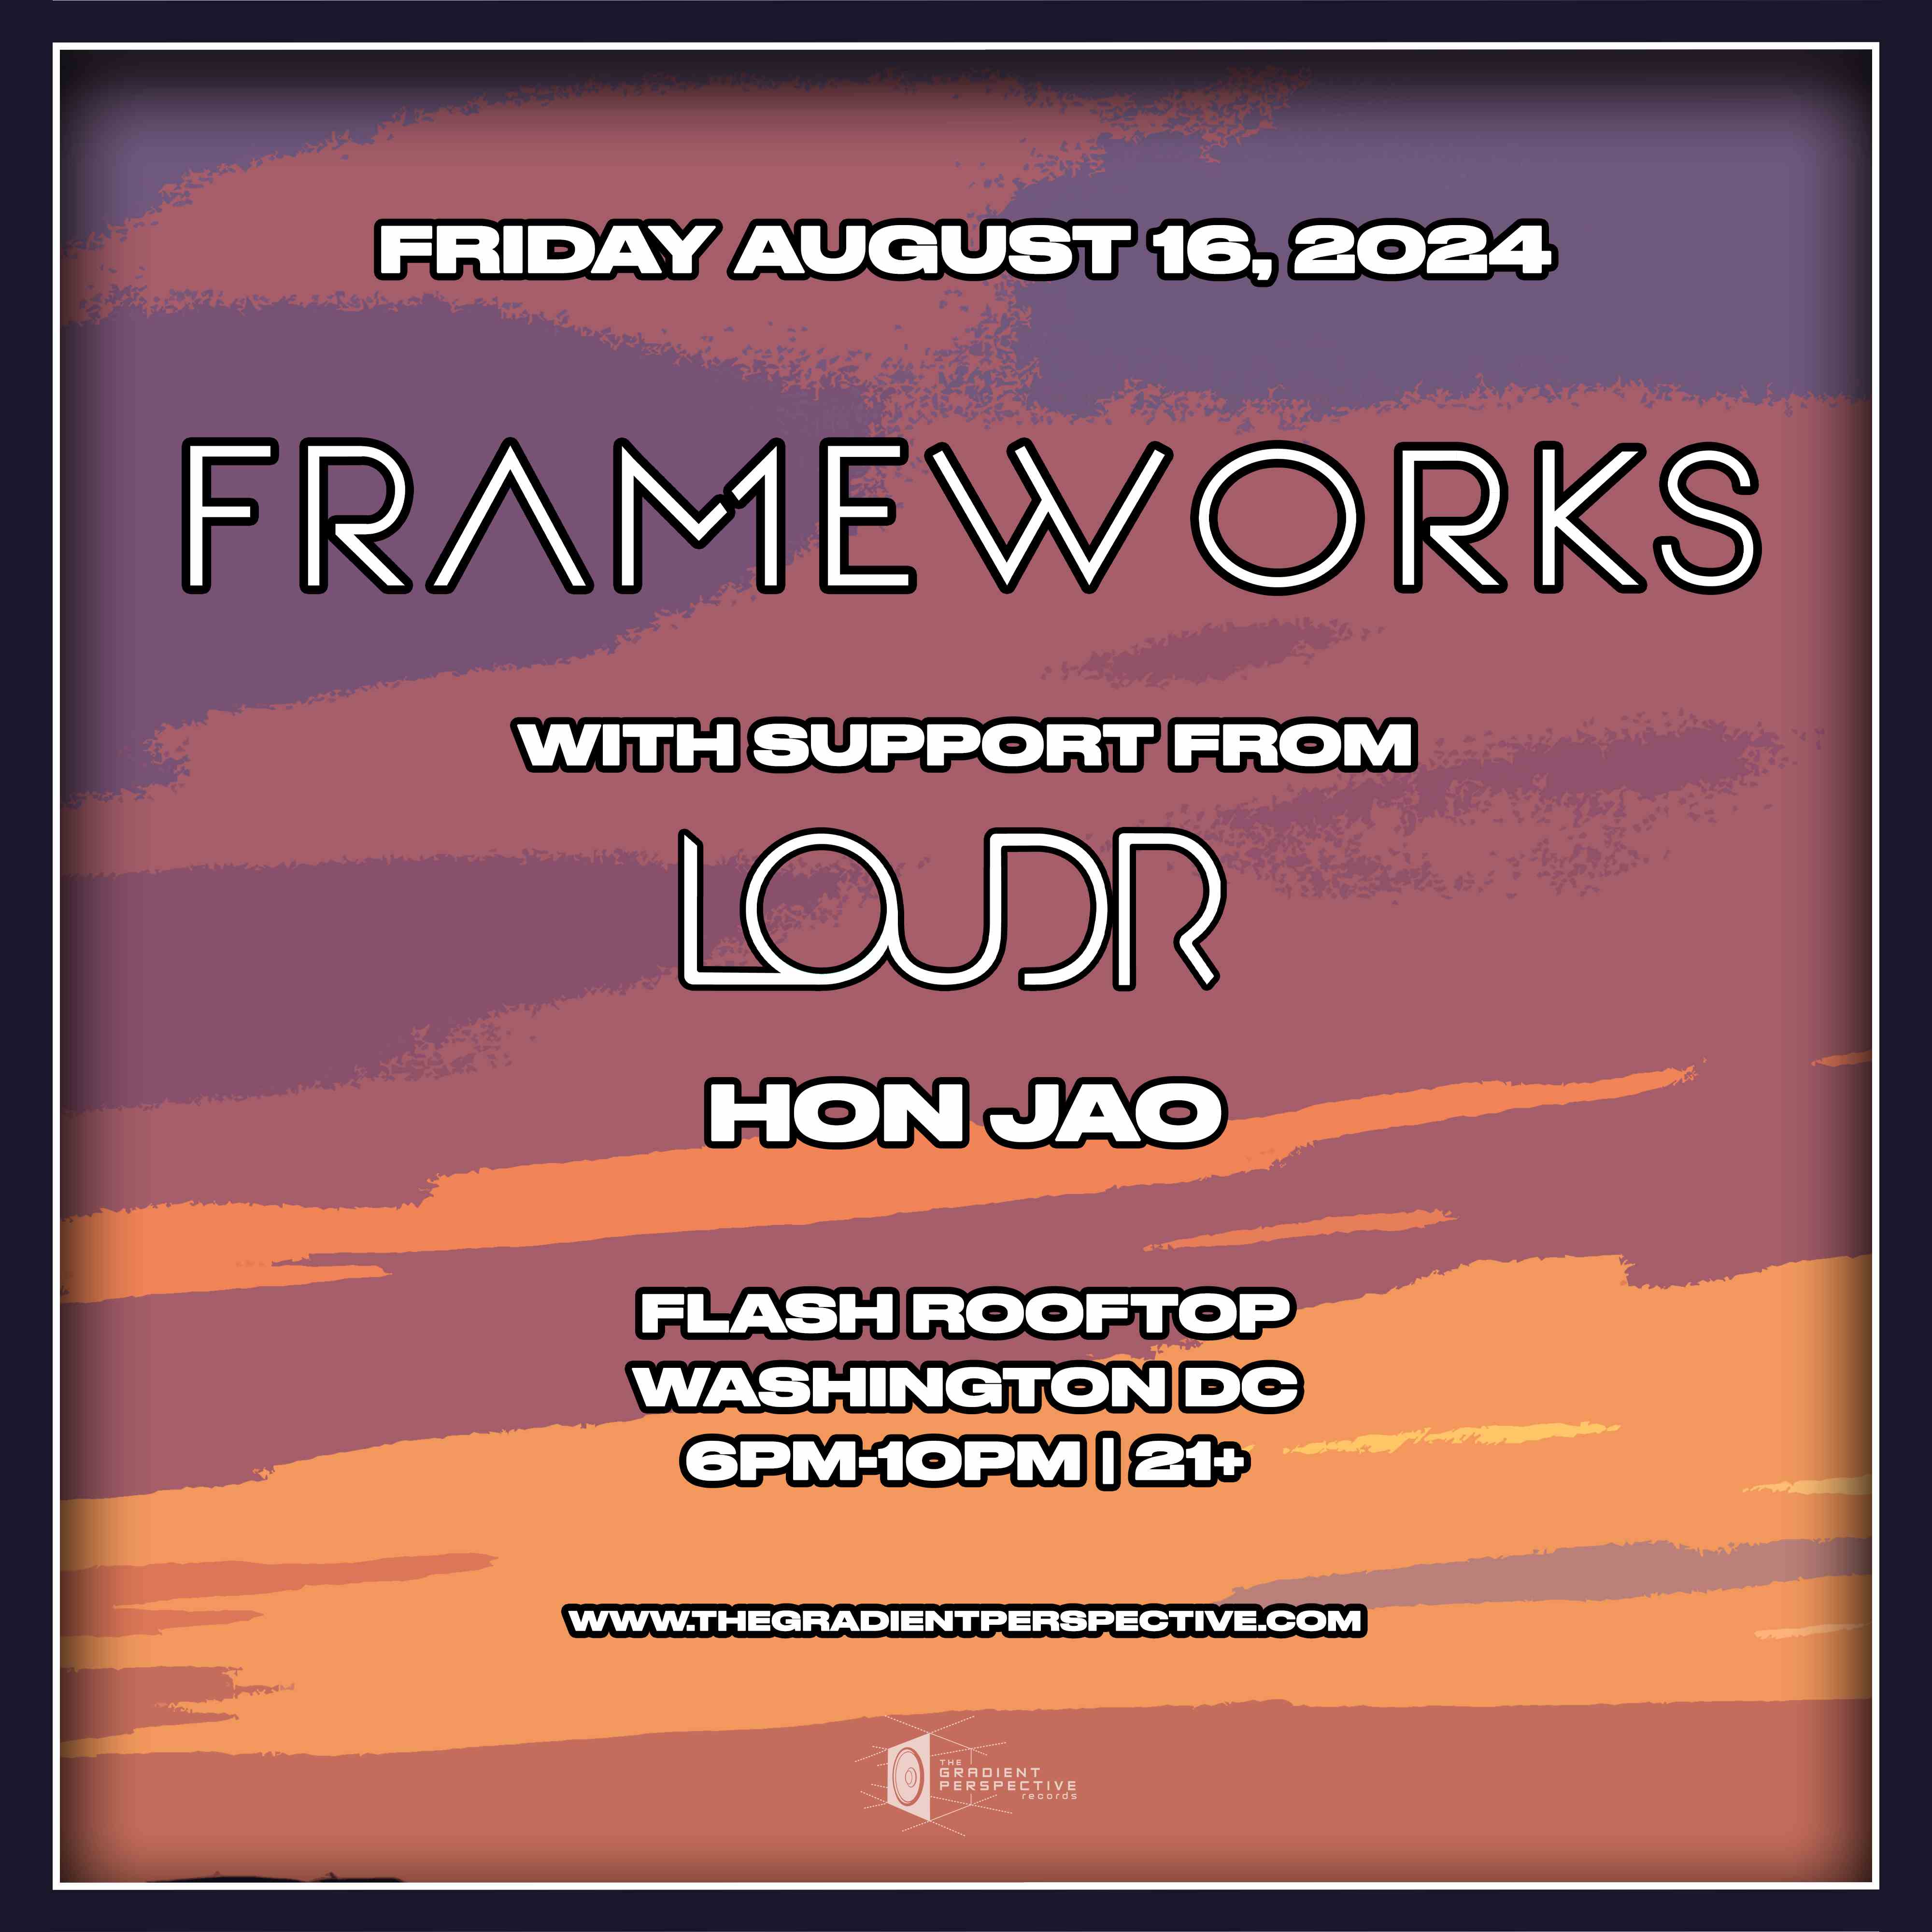 The Gradient Perspective Presents: An Evening With Frameworks event flyer